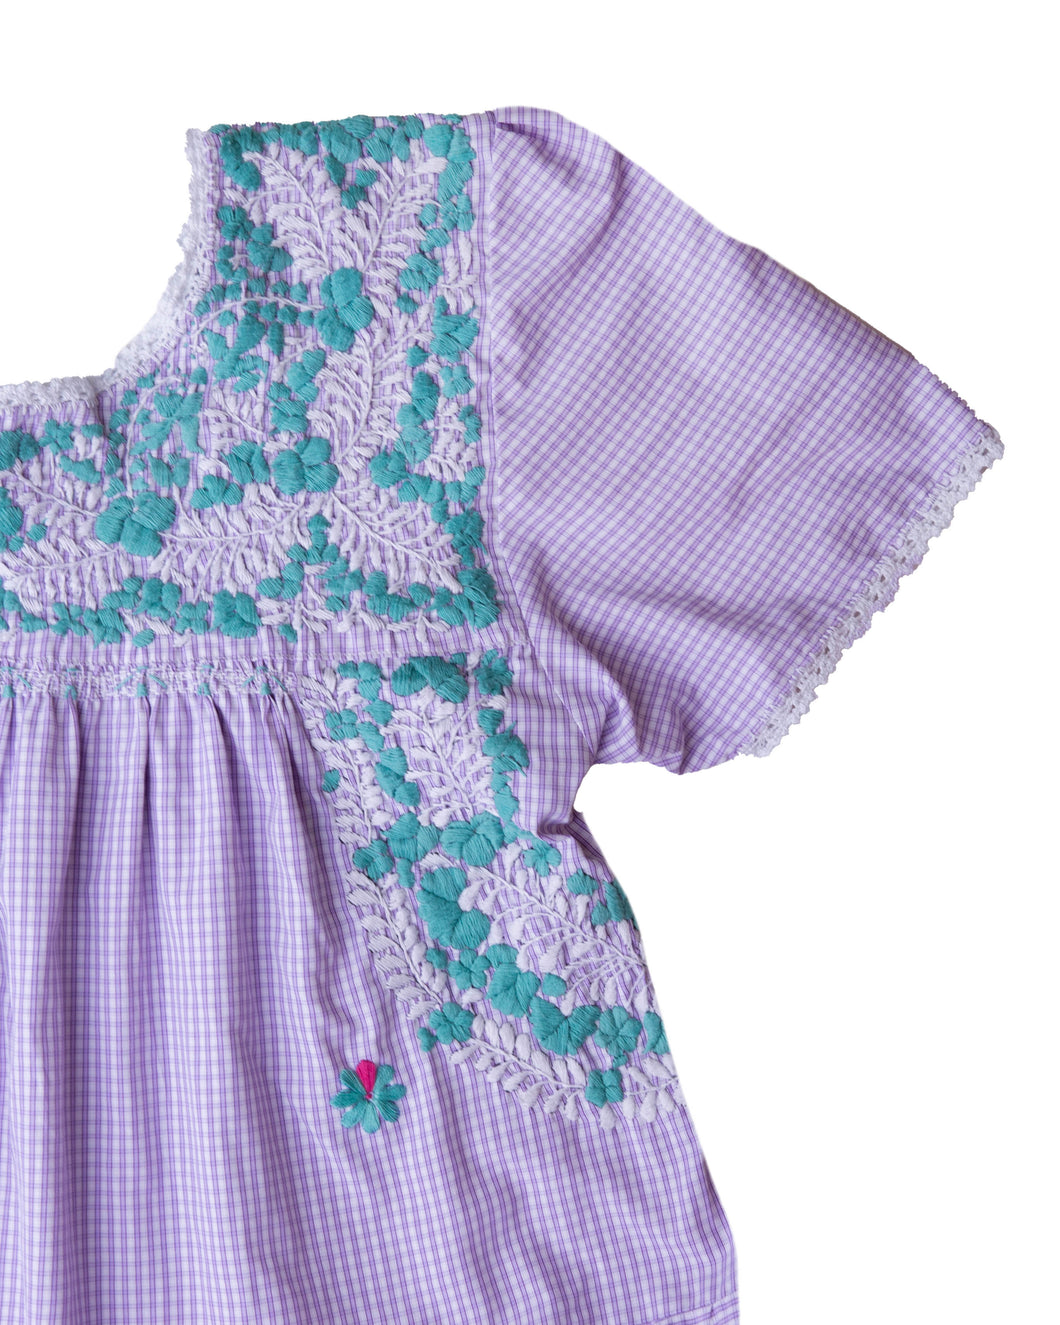 Madre Gabriela Dress | Purple & White Gingham with Teal